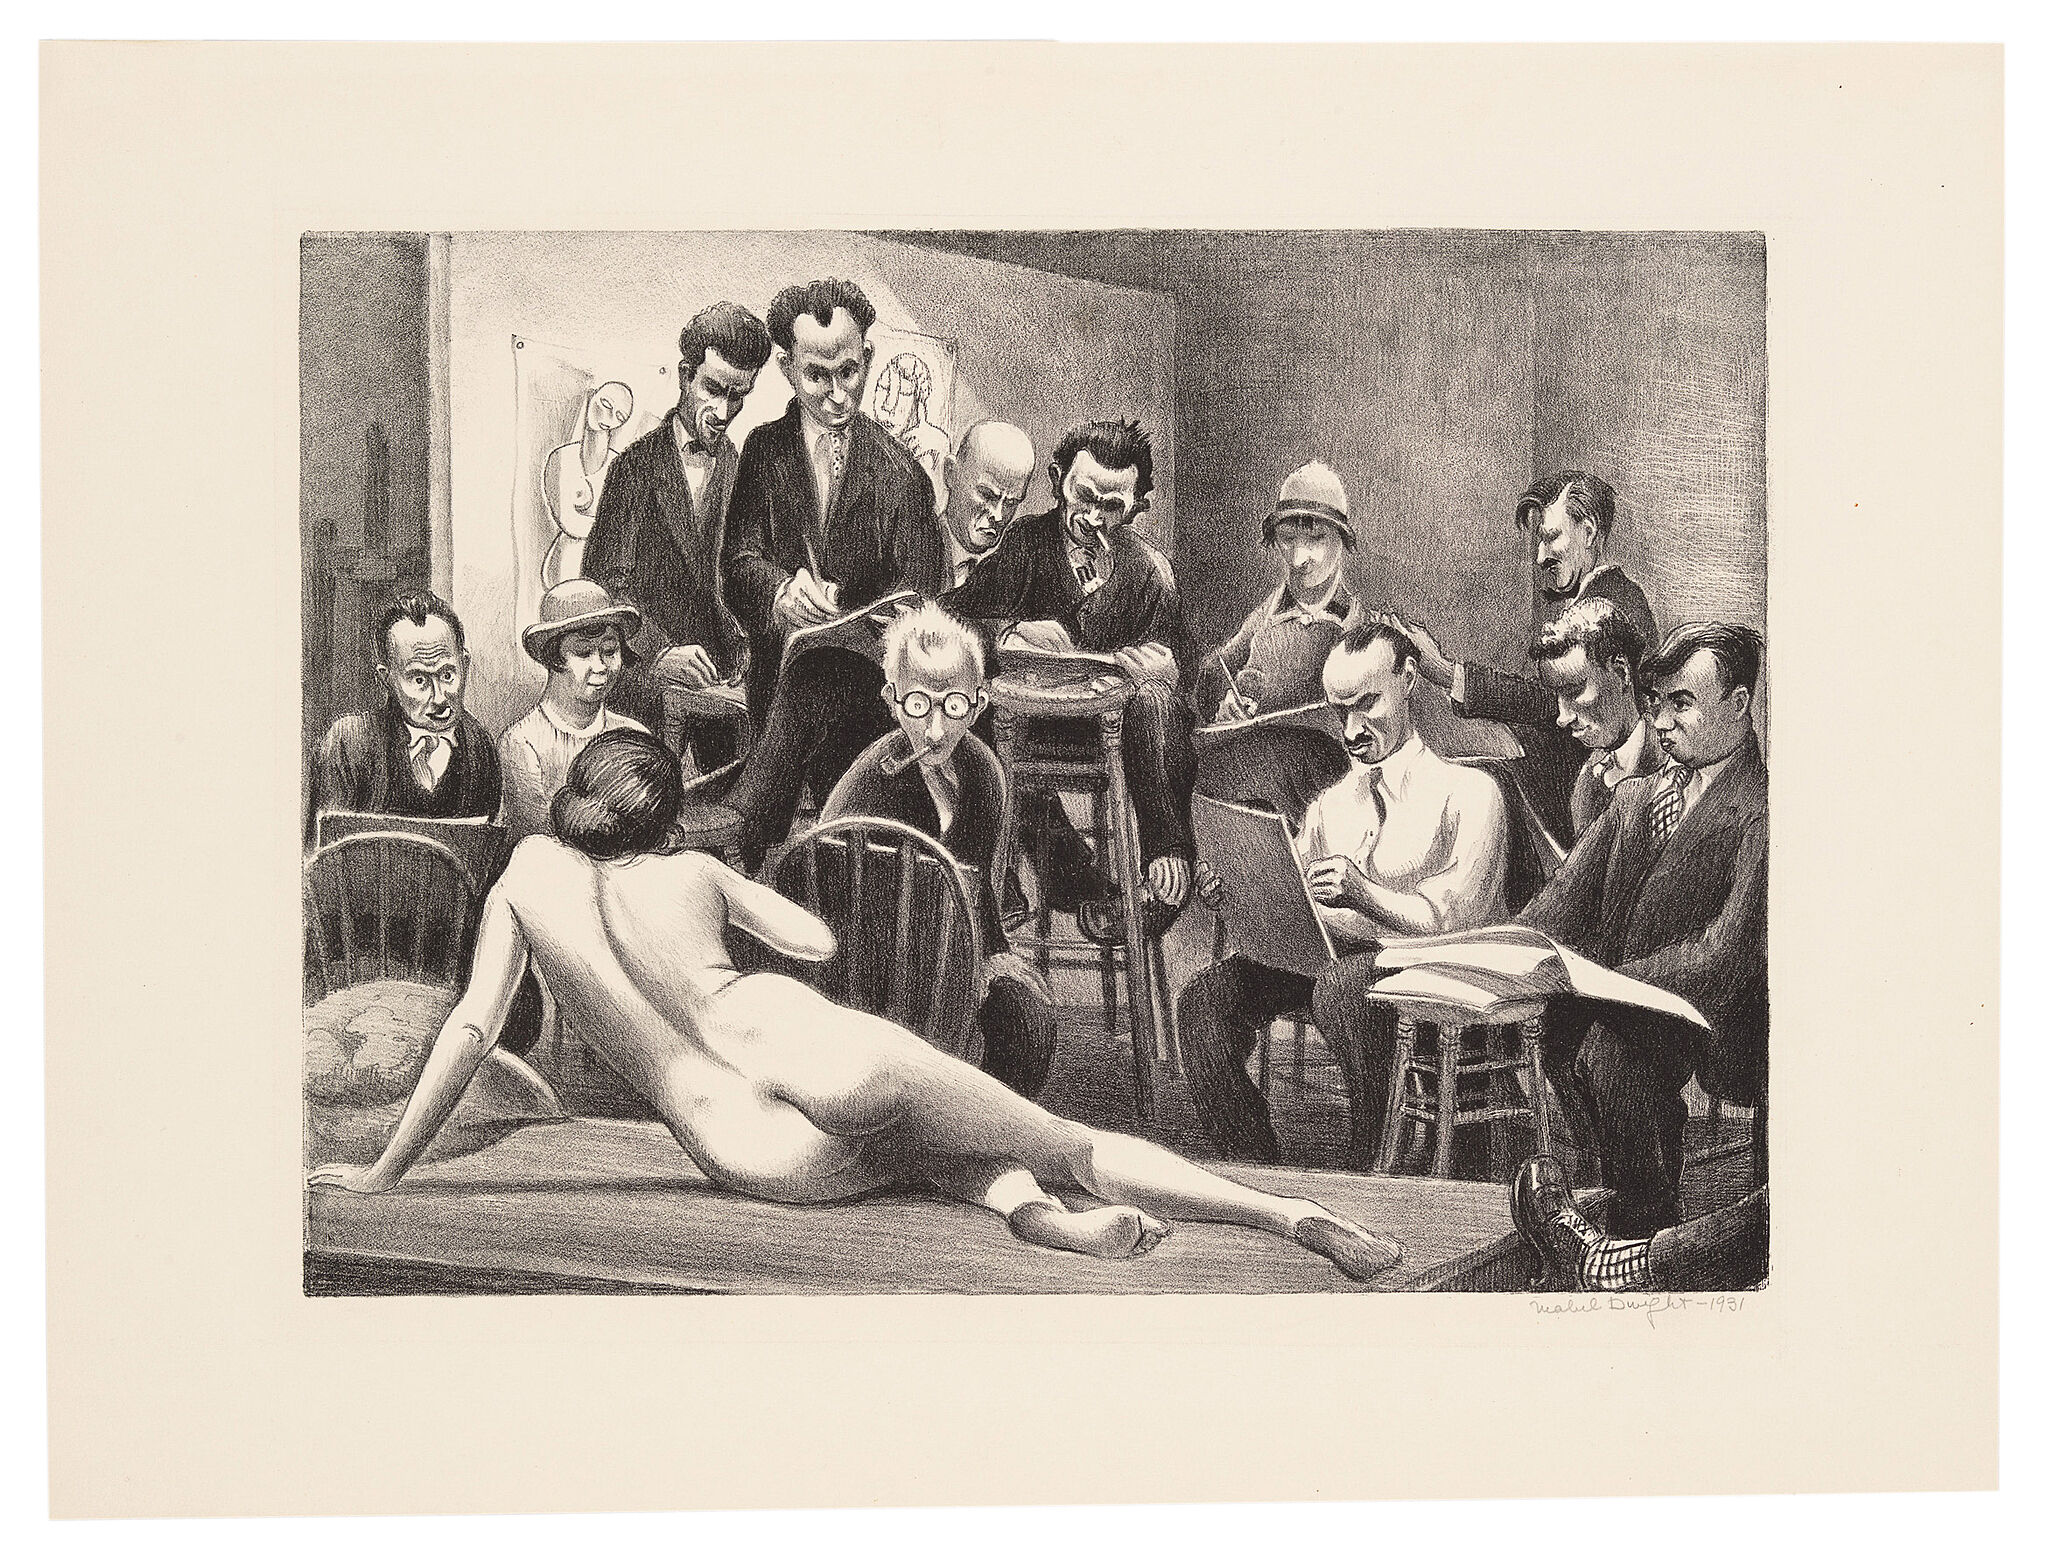 A lithograph of a room of men drawing a woman posing in the nude.